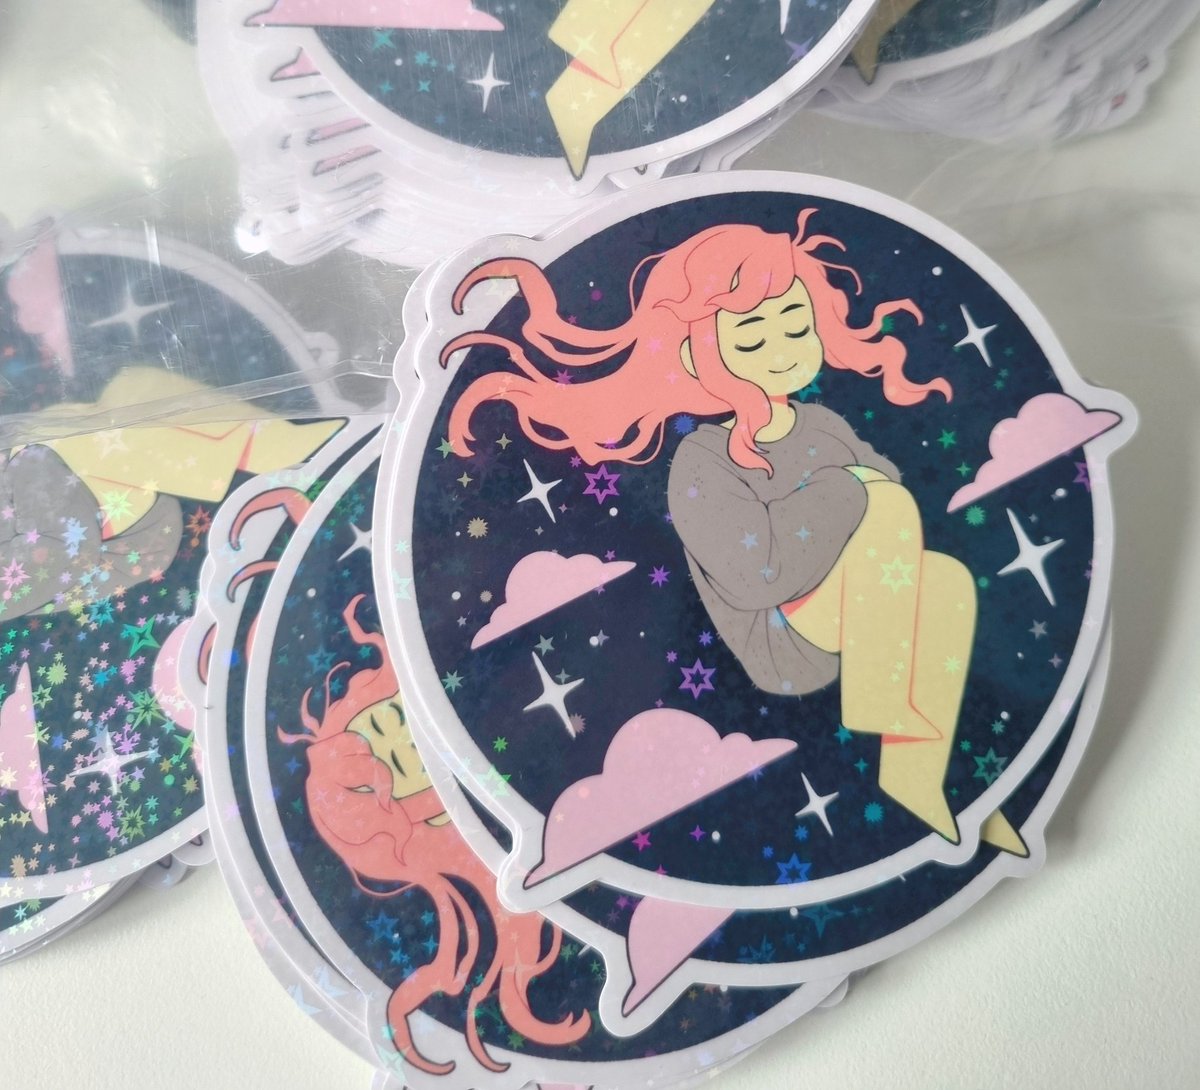 TCAF CROWD: If you preorder my comic either at my stall or before (if you can show me a receipt), I'll give you one of these big beautiful shiny stickers!! They're 4 inches!!! IN-PERSON ONLY! I'll also be bringing these to MCM for the UK crowd! lavendercloudscomic.carrd.co